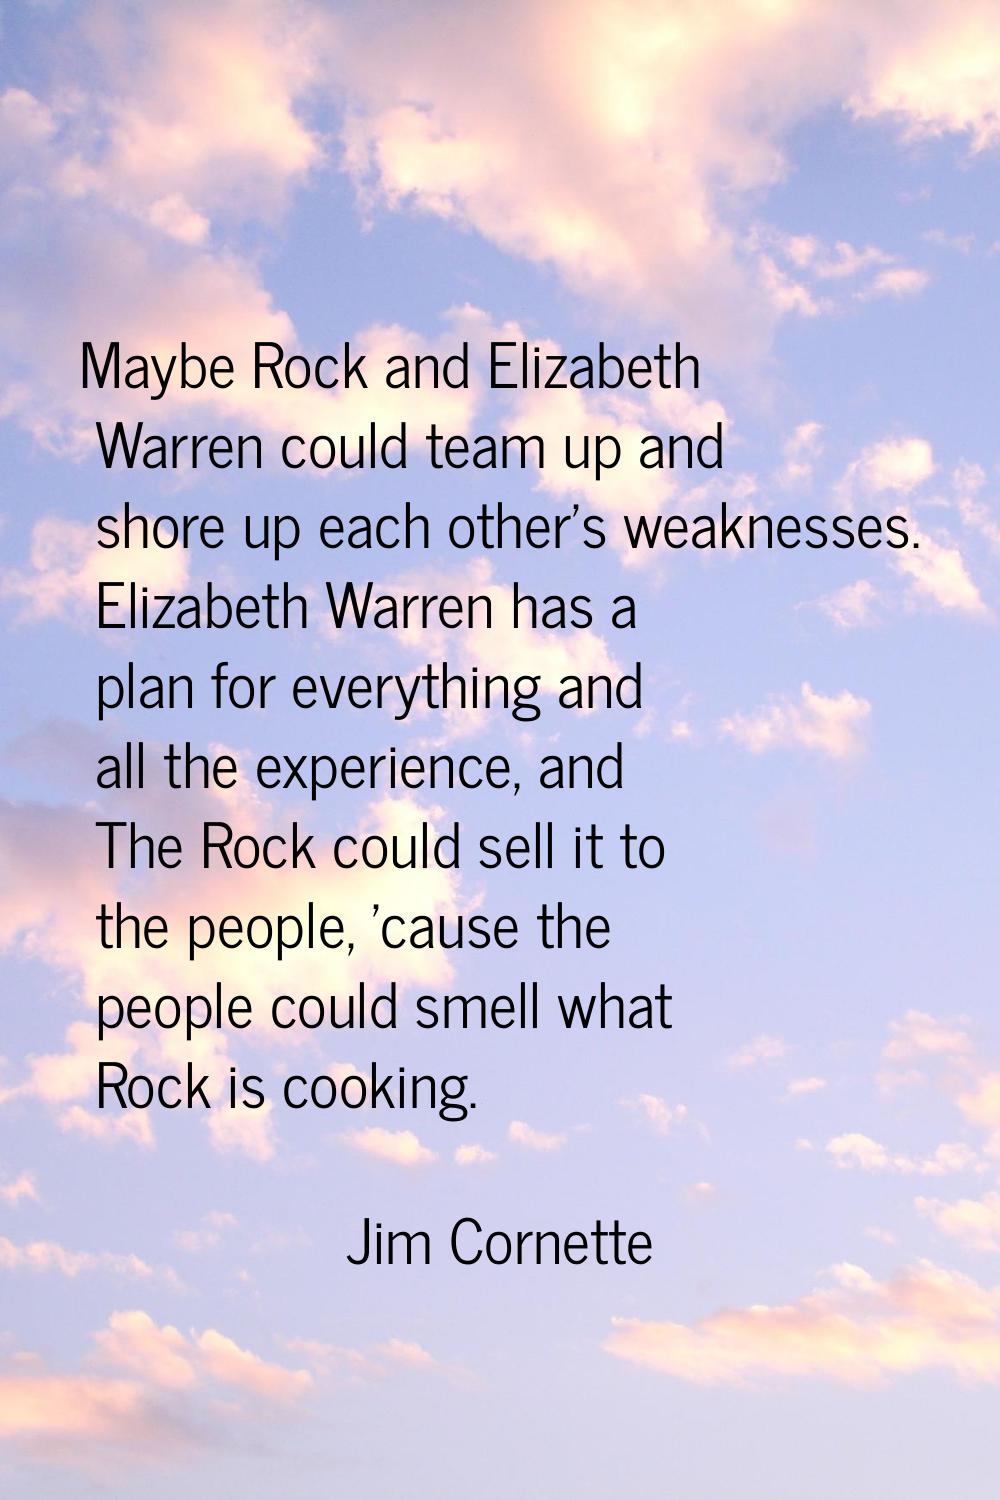 Maybe Rock and Elizabeth Warren could team up and shore up each other's weaknesses. Elizabeth Warre